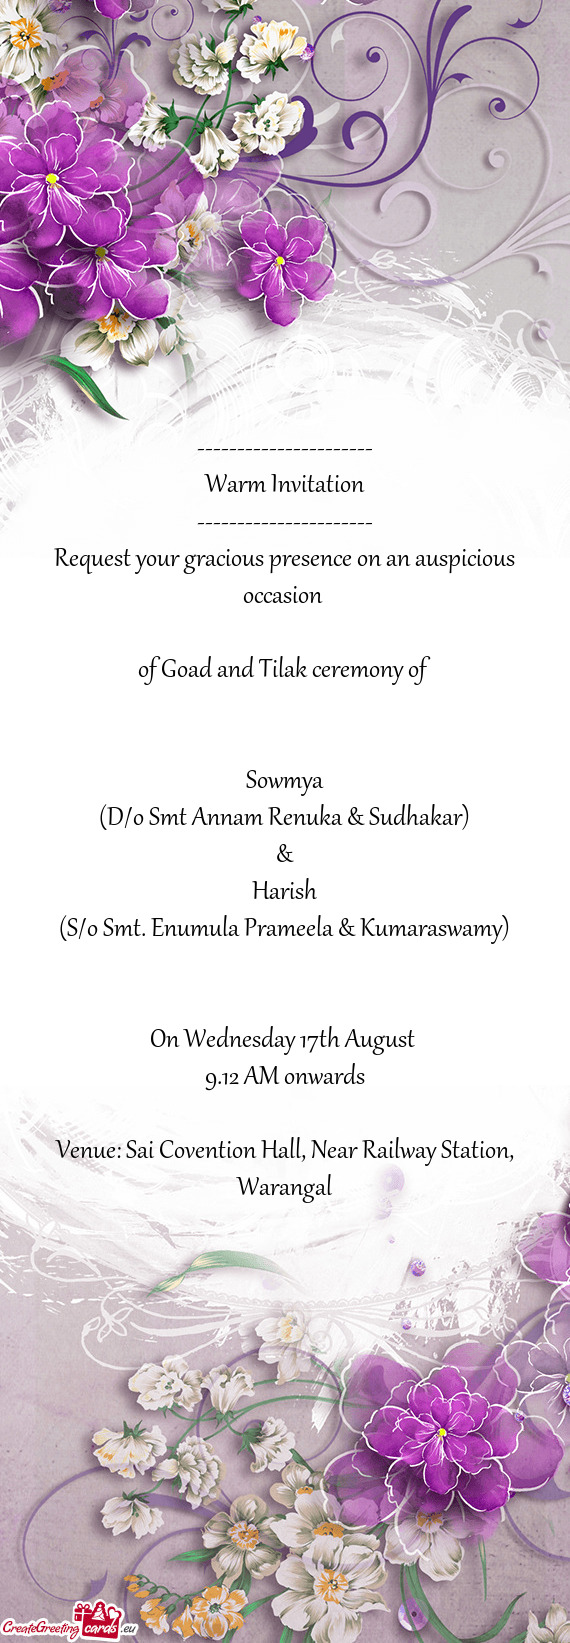 Request your gracious presence on an auspicious occasion